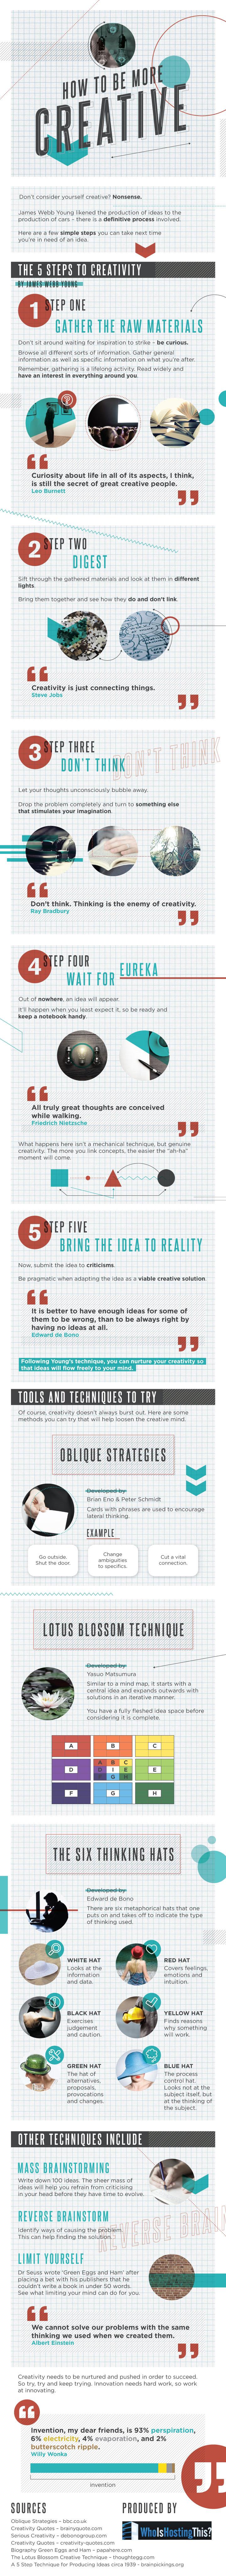 how-to-be-more-creative-infographic